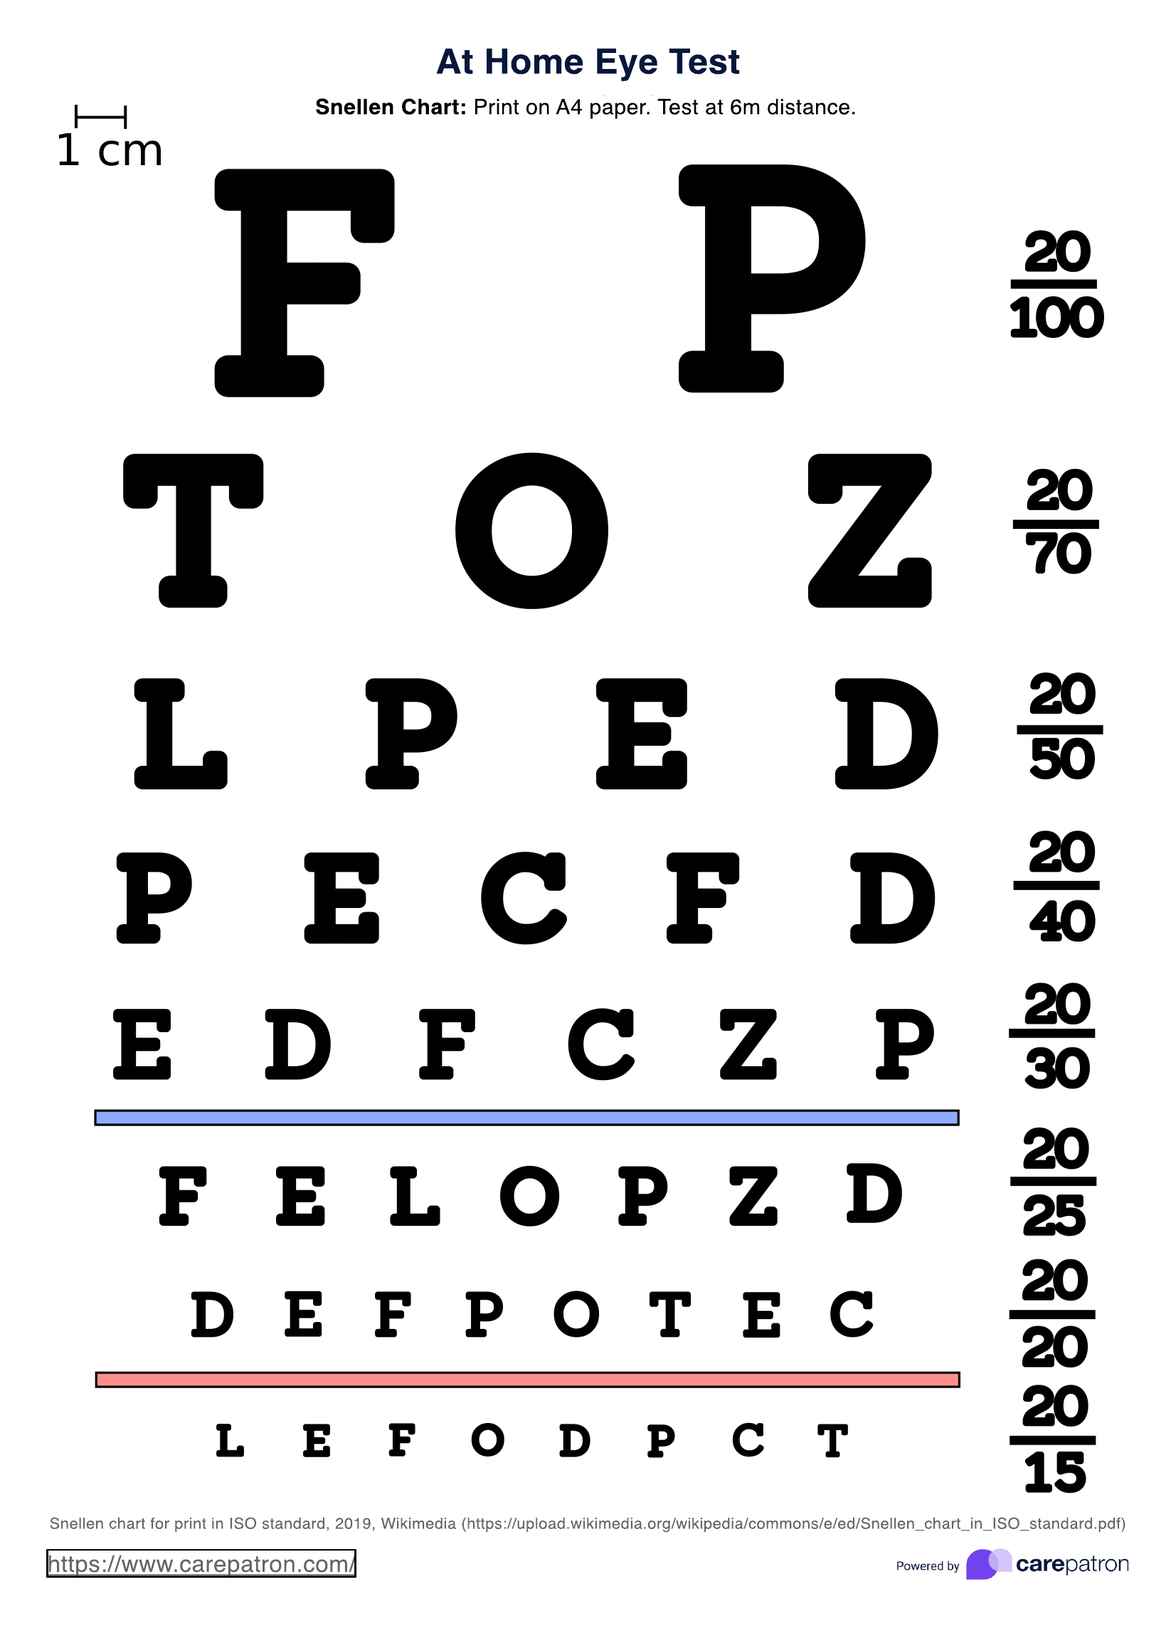 At Home Eye Test PDF Example